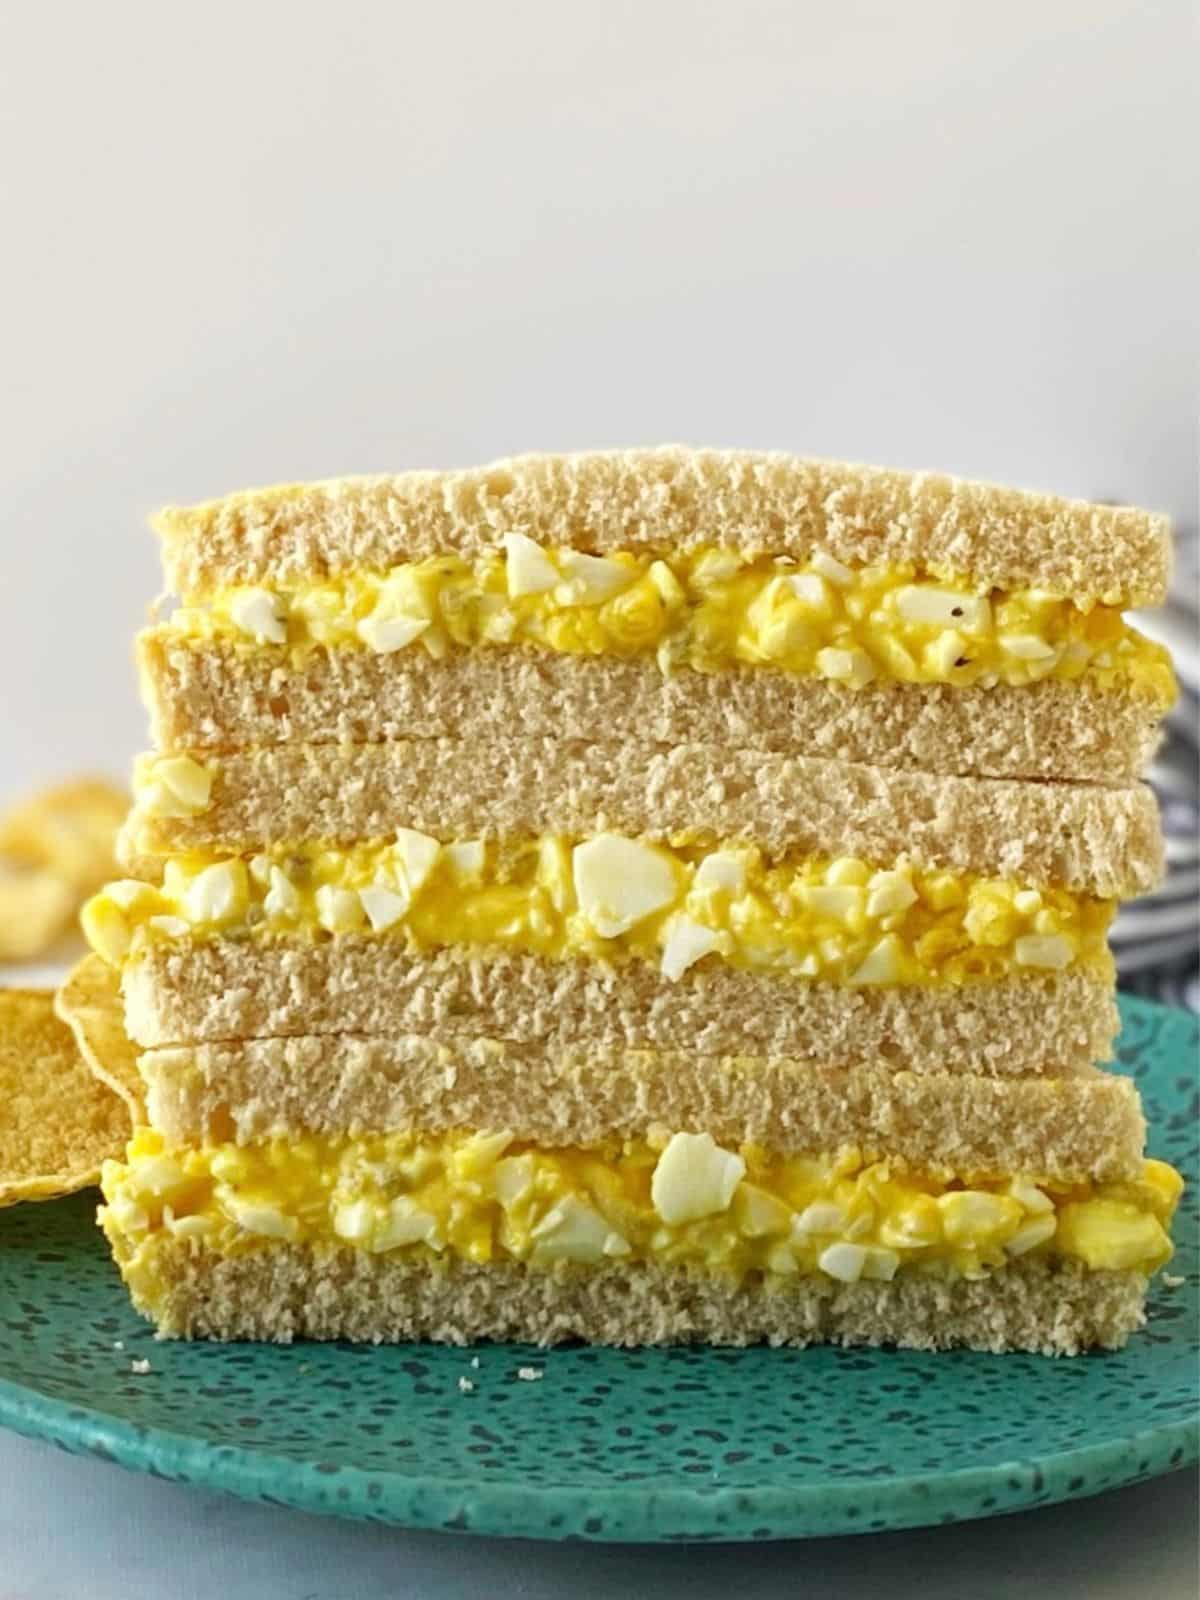 egg salad sandwiches cut in half and stacked on a green plate.